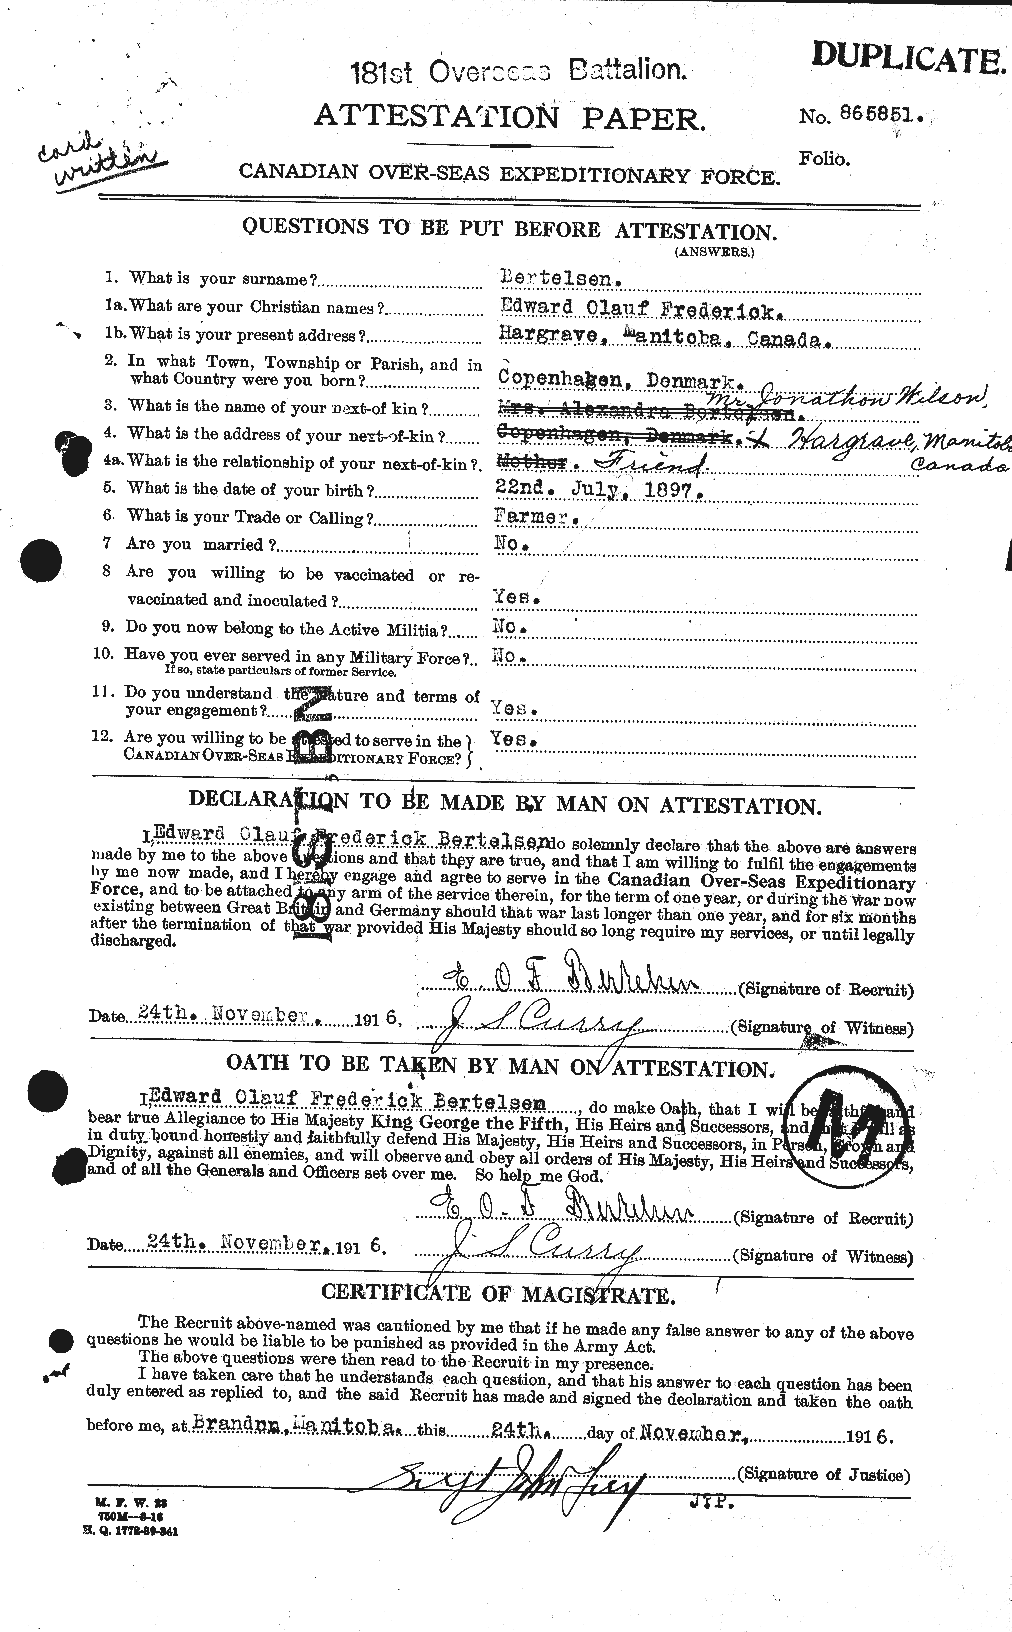 Personnel Records of the First World War - CEF 235570a